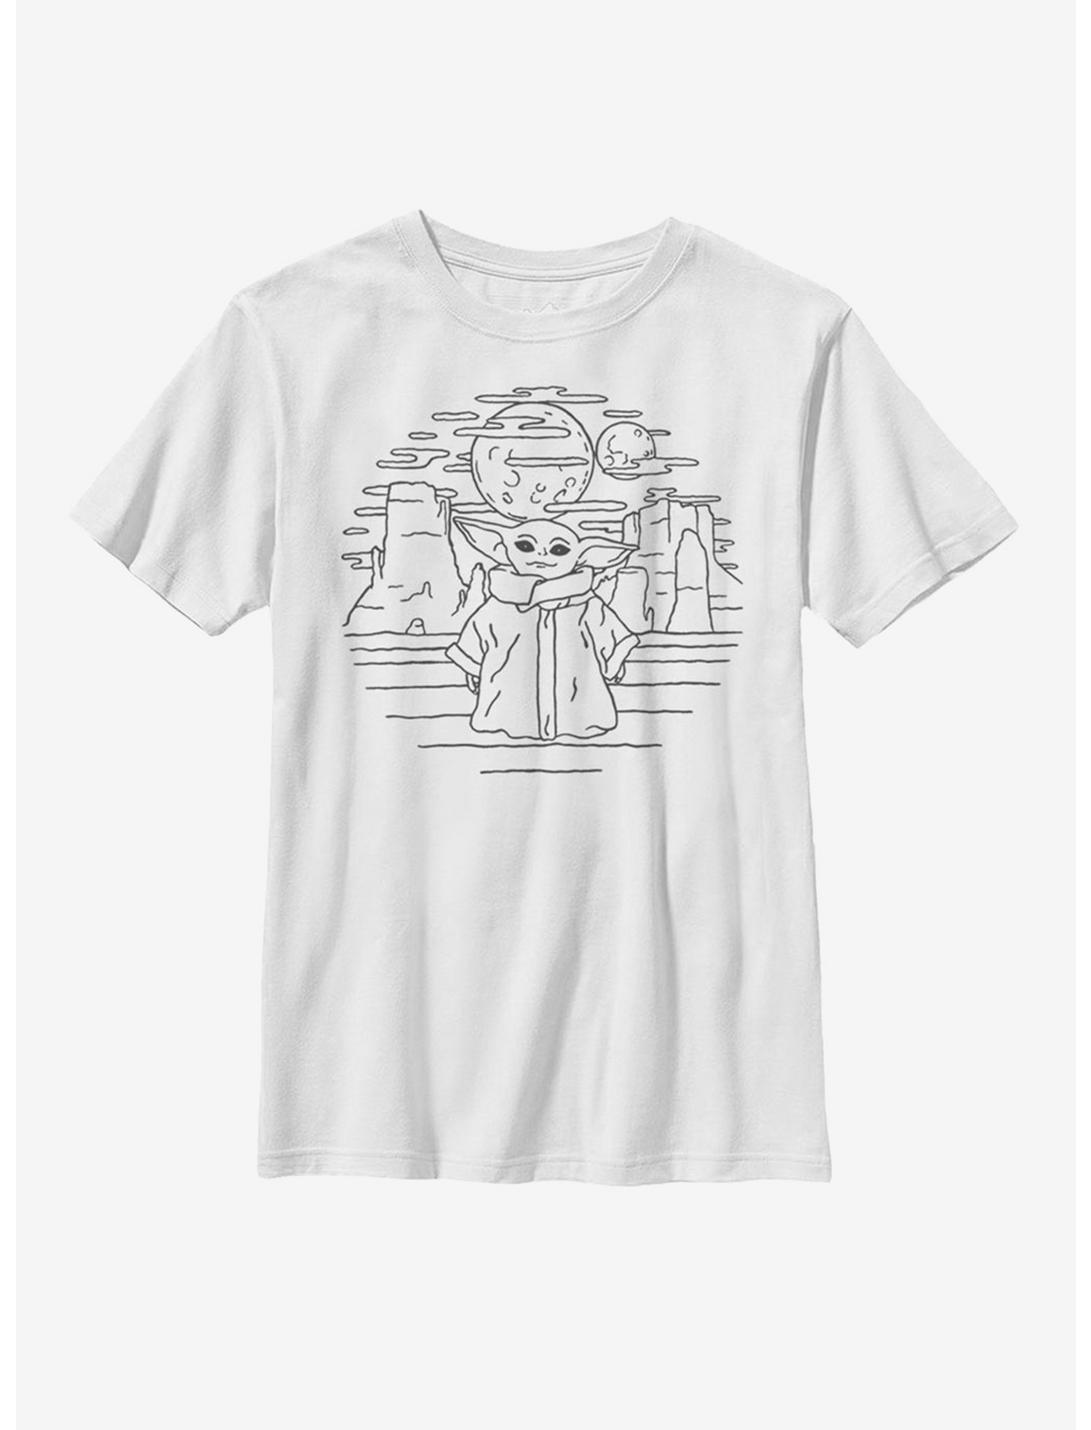 Star Wars The Mandalorian The Child Doodle Youth T-Shirt, WHITE, hi-res